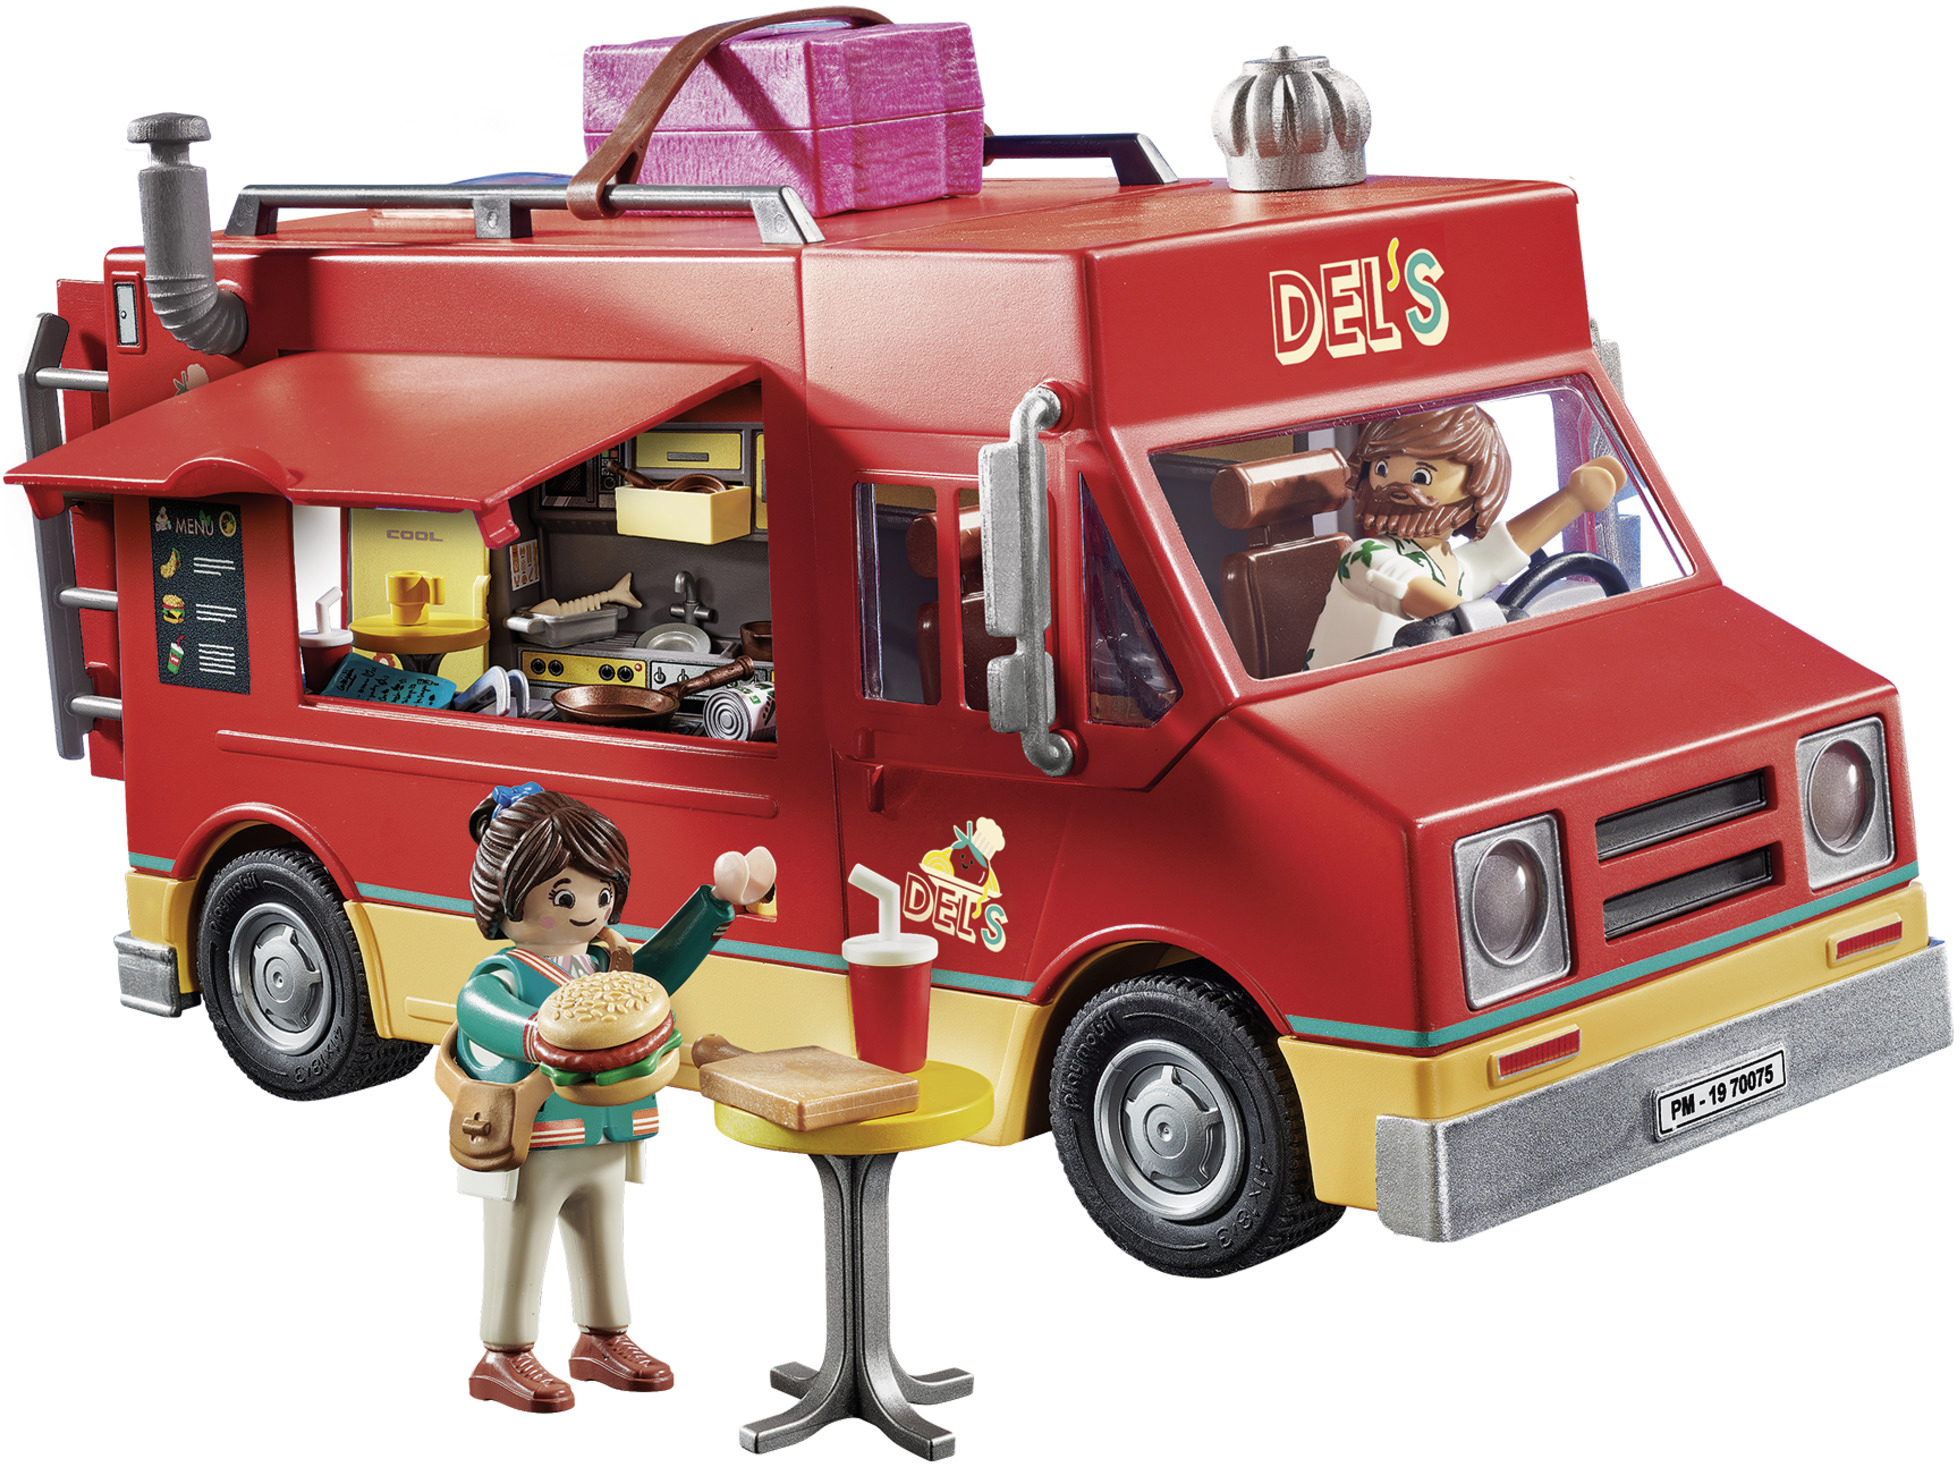 PLAYMOBIL THE MOVIE Del's Food Truck - image 1 of 6